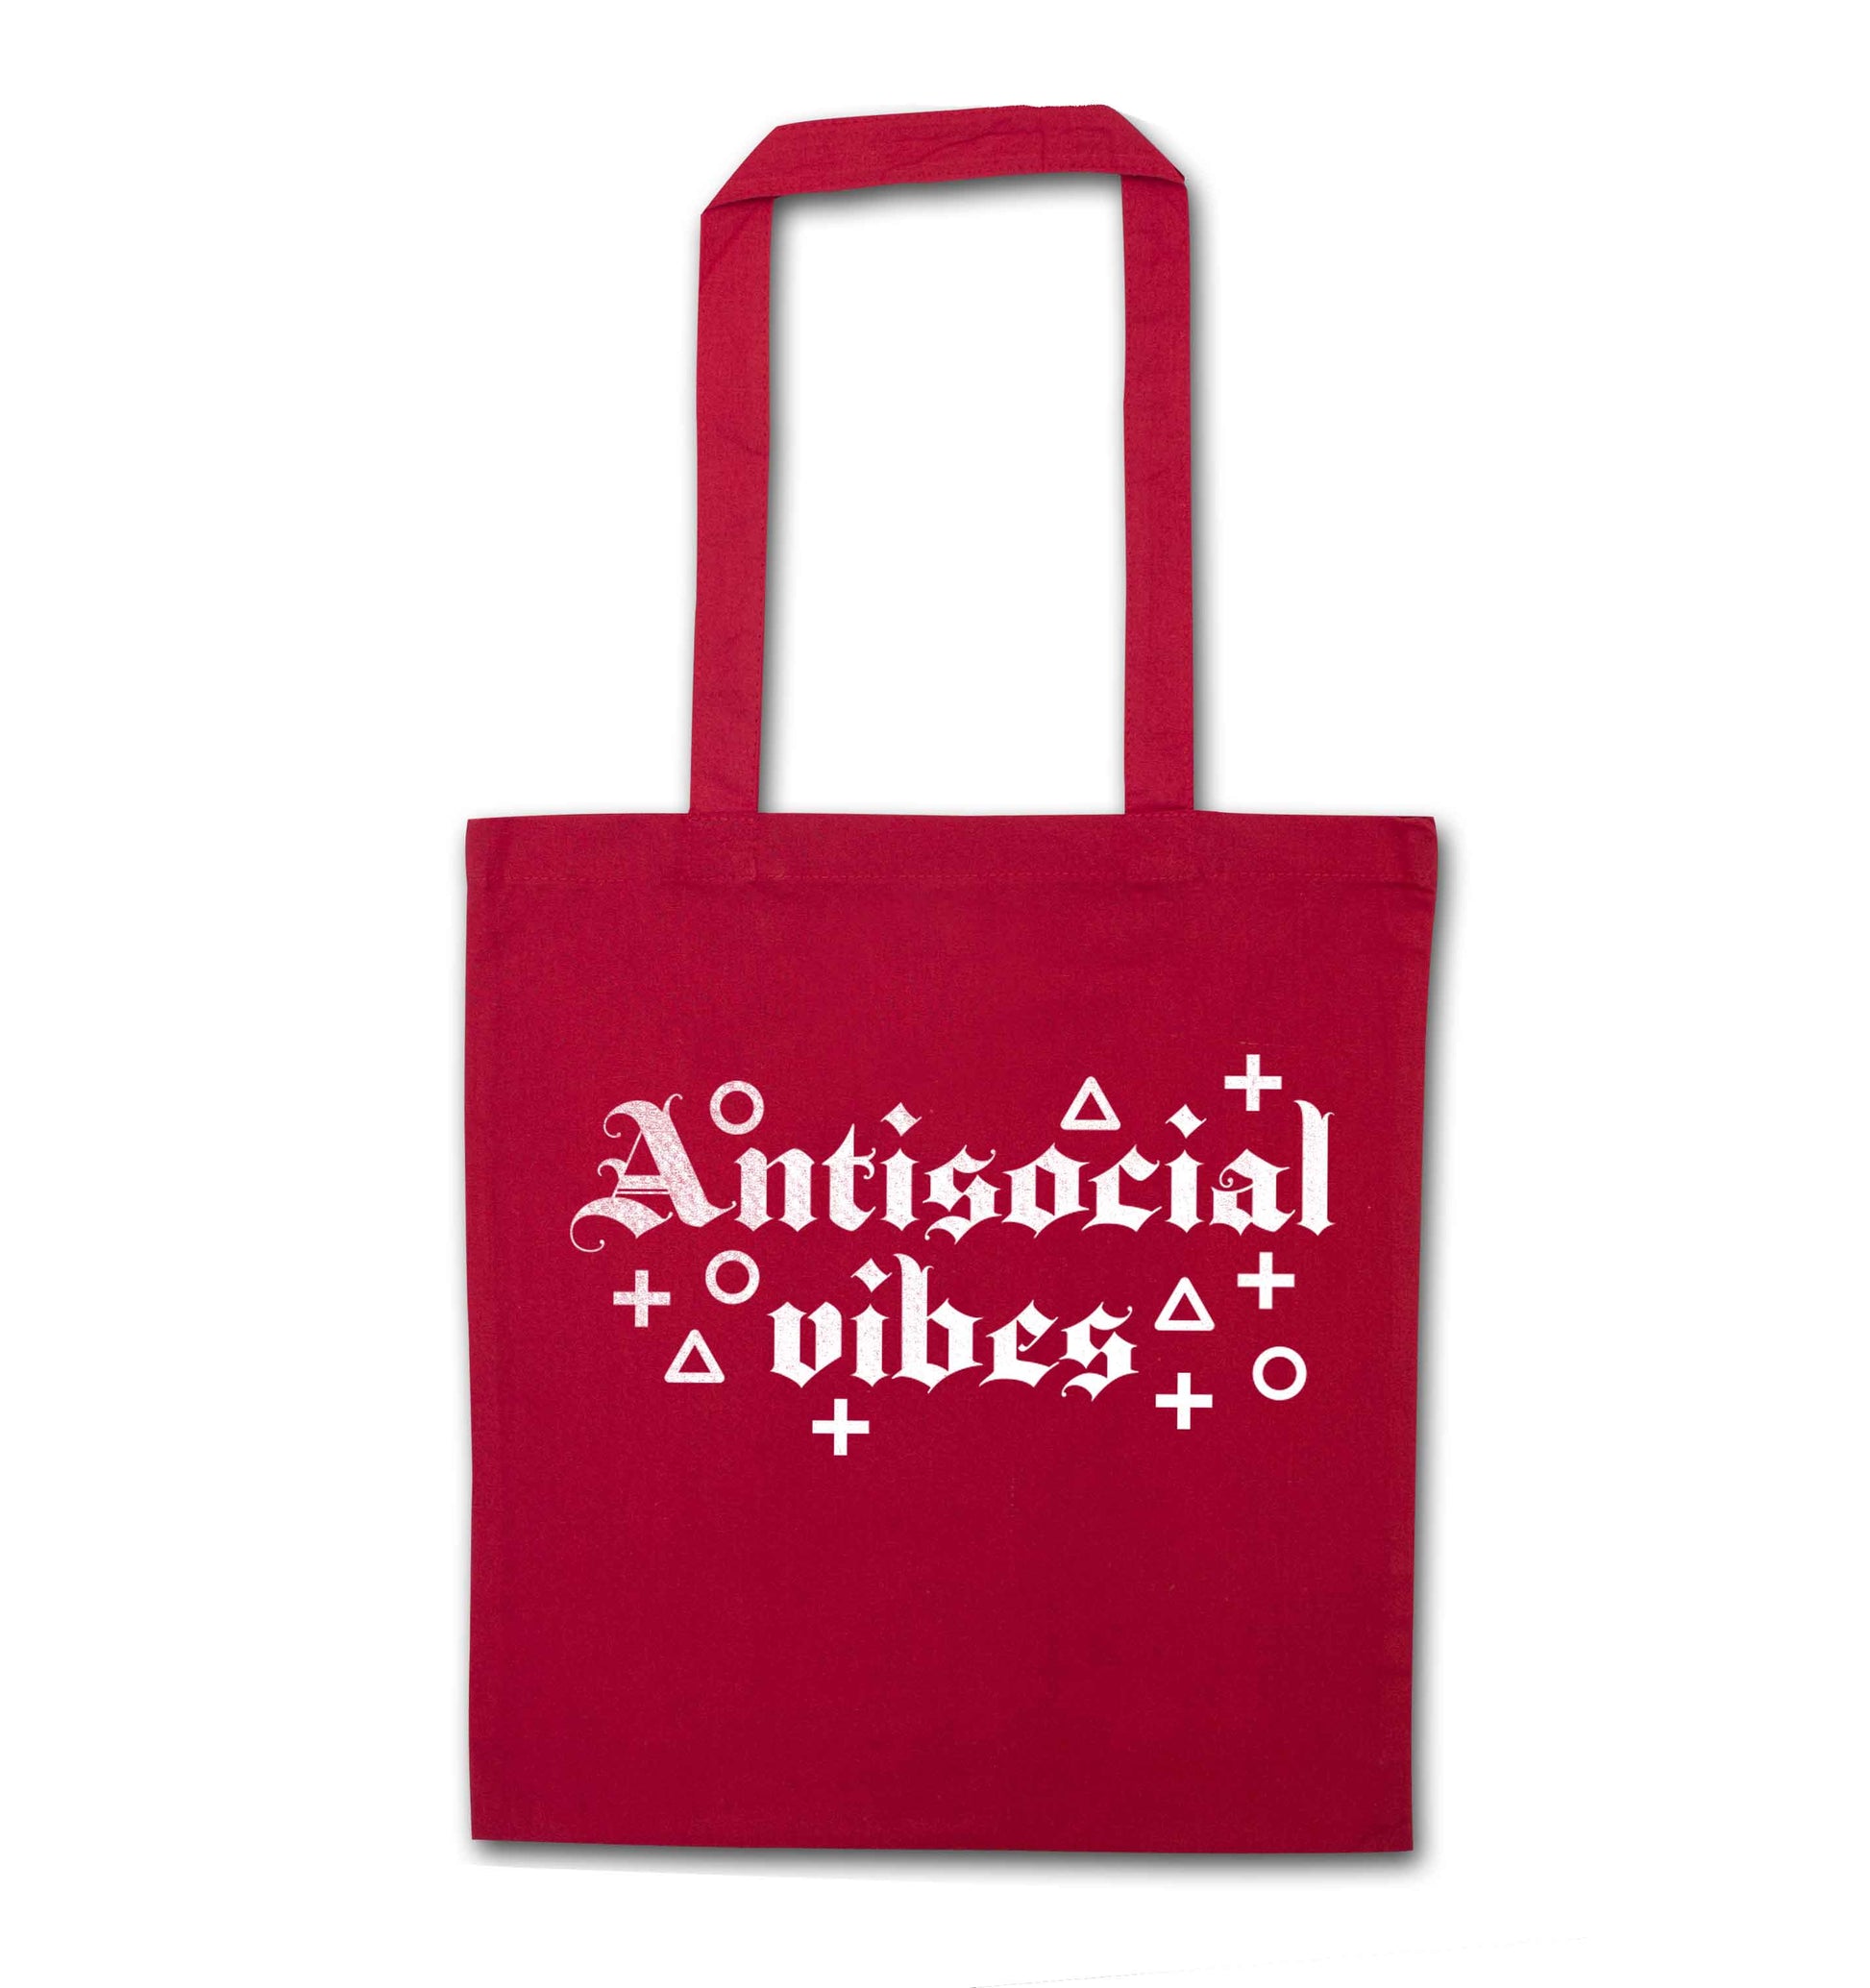 Antisocial vibes red tote bag